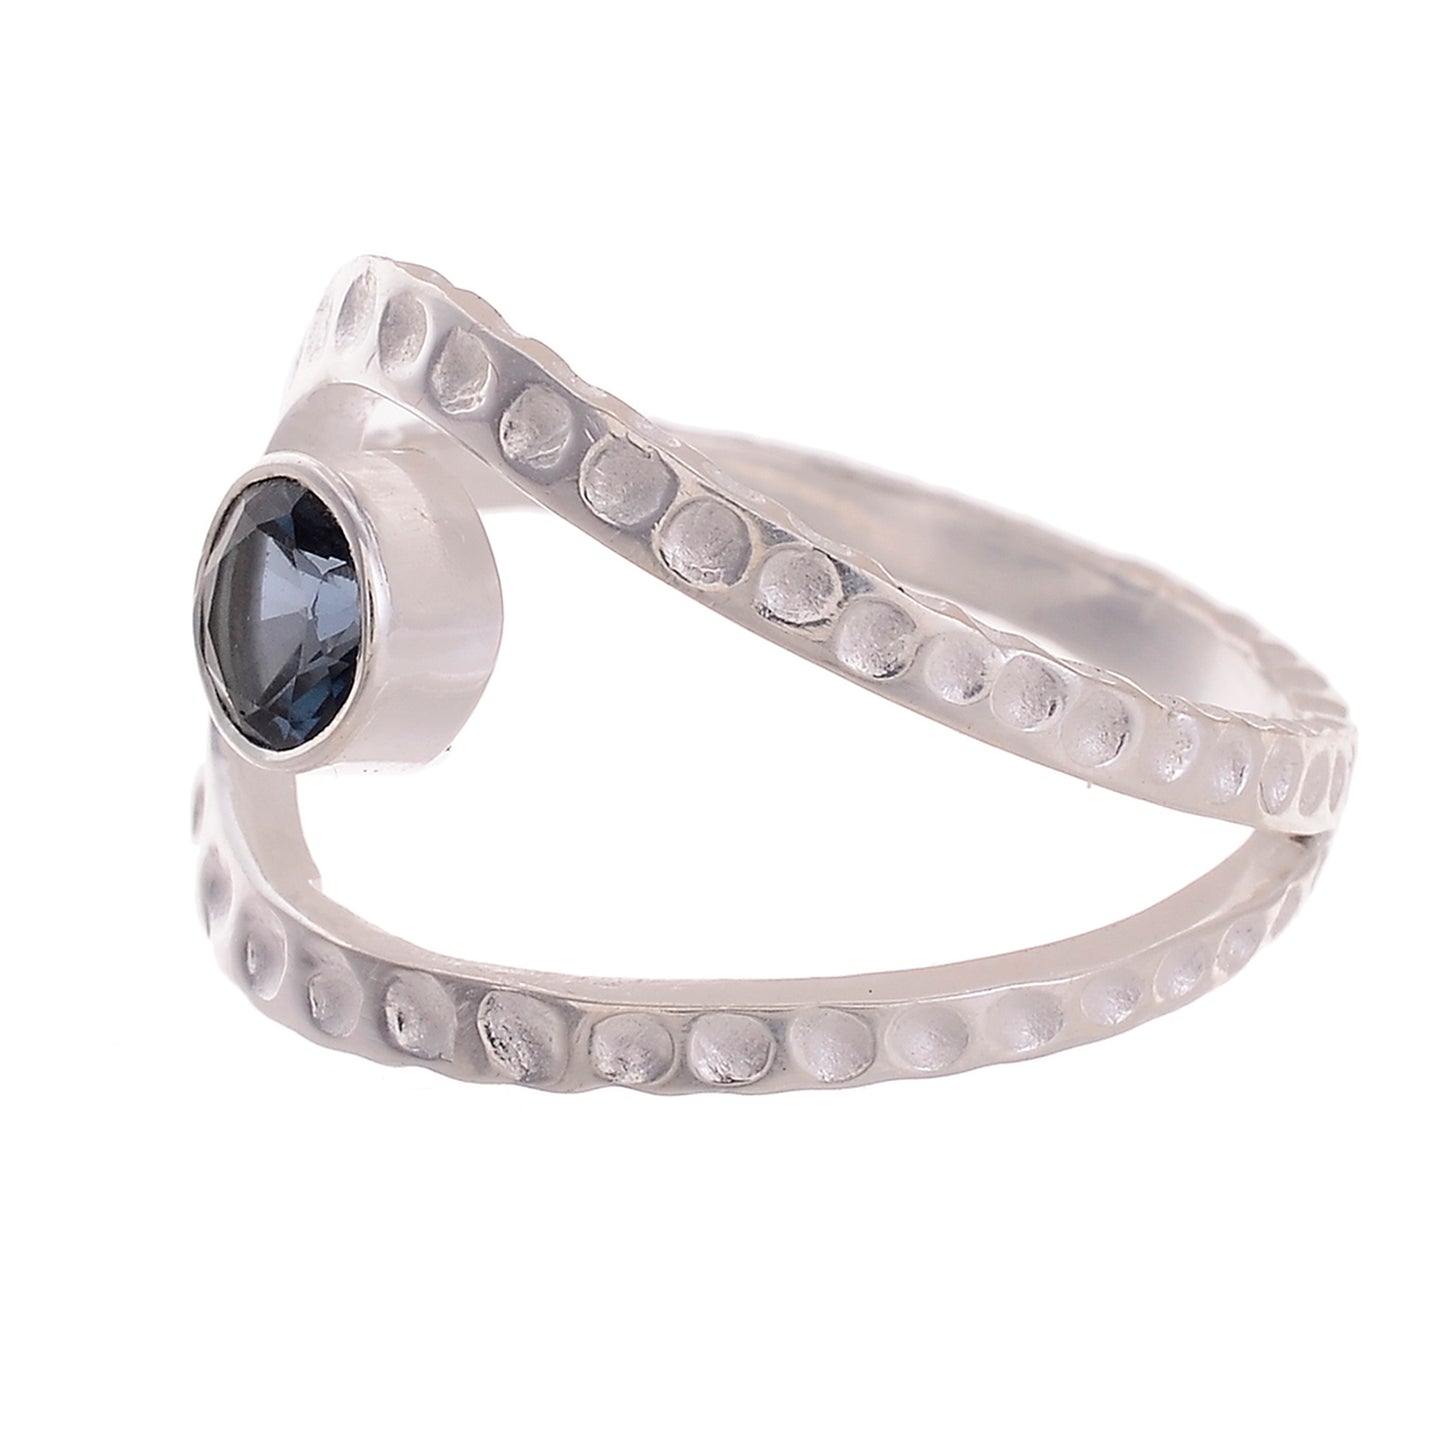 Sterling Silver Hammered Gemstone Laso Ring - Available in 16 stone